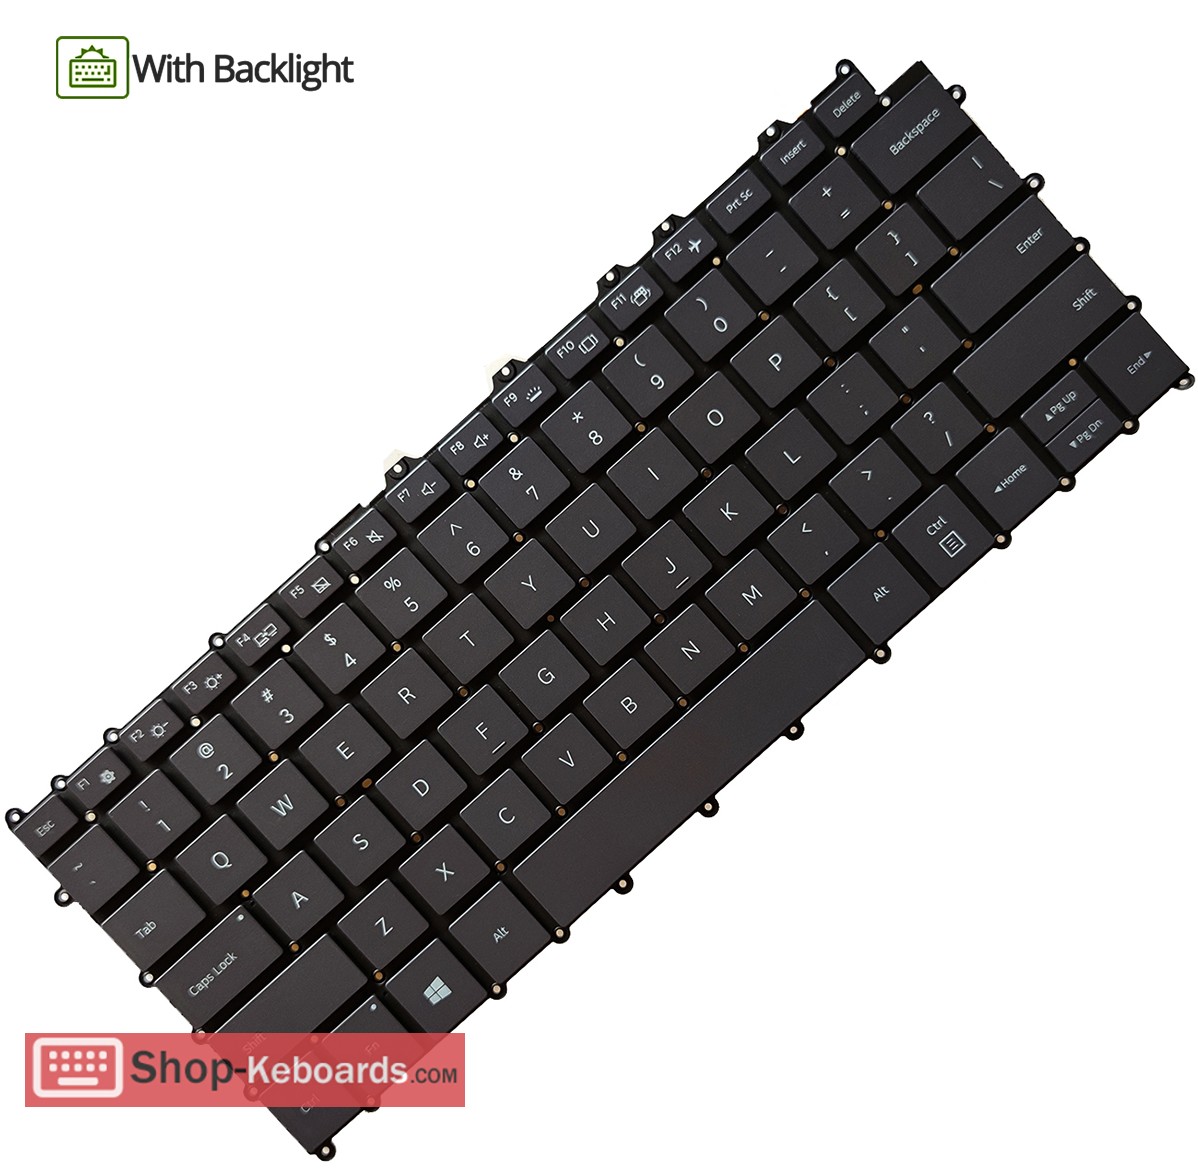 Samsung Galaxy Book S NP767 2020 Keyboard replacement